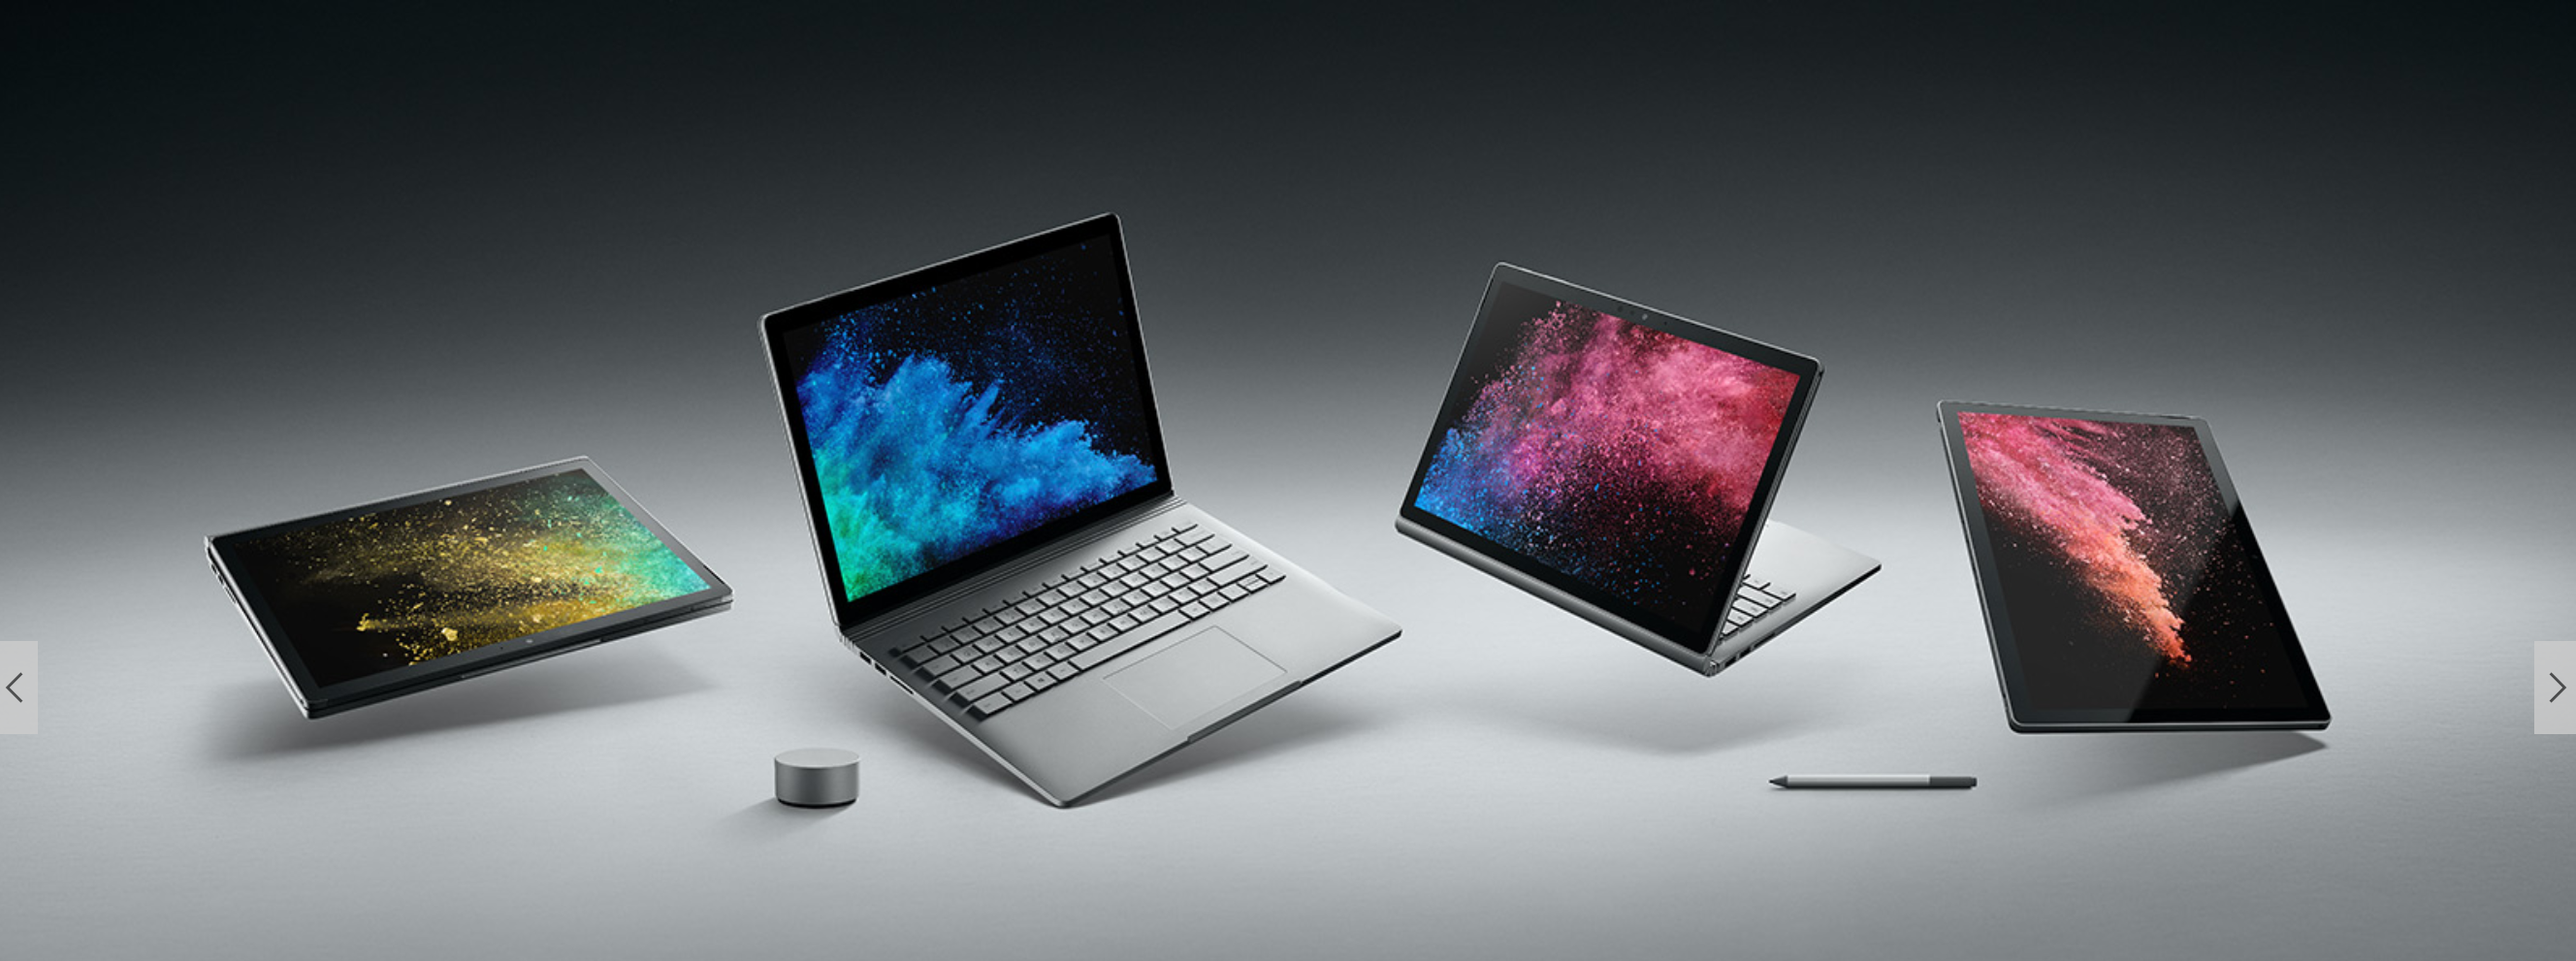 Surface Book Wallpapers